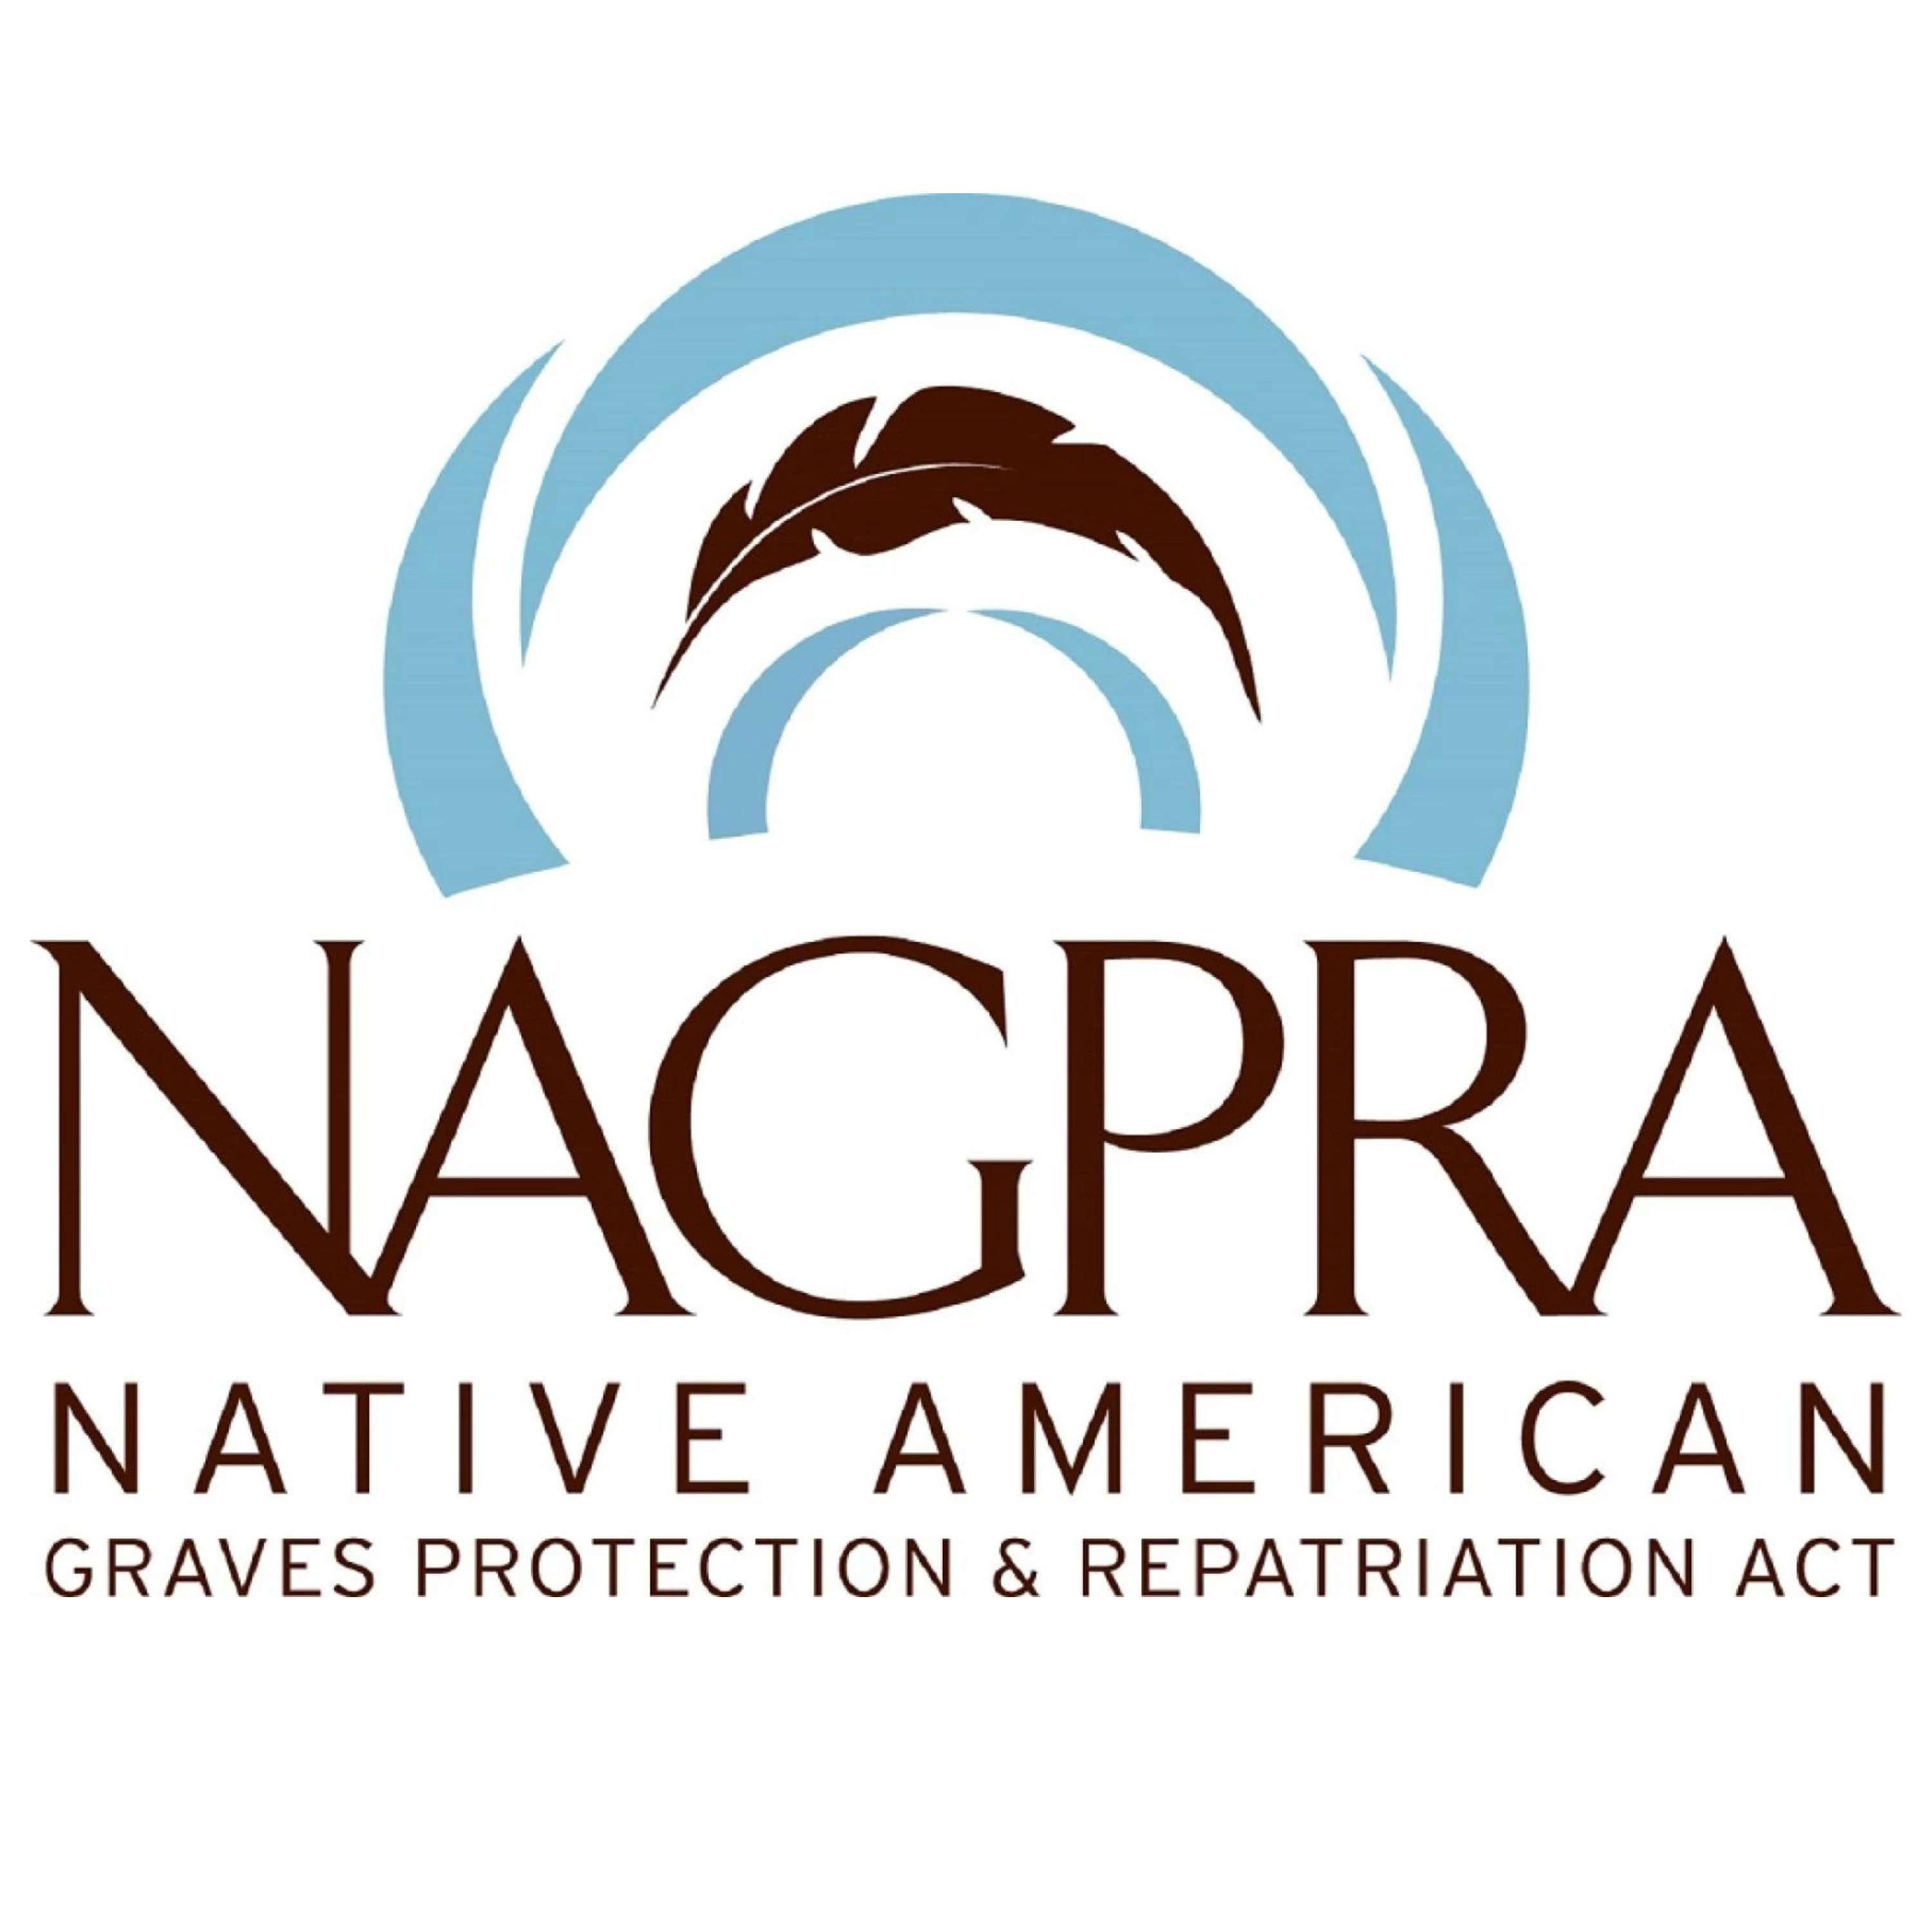 Changes to NAGPRA go into Effect